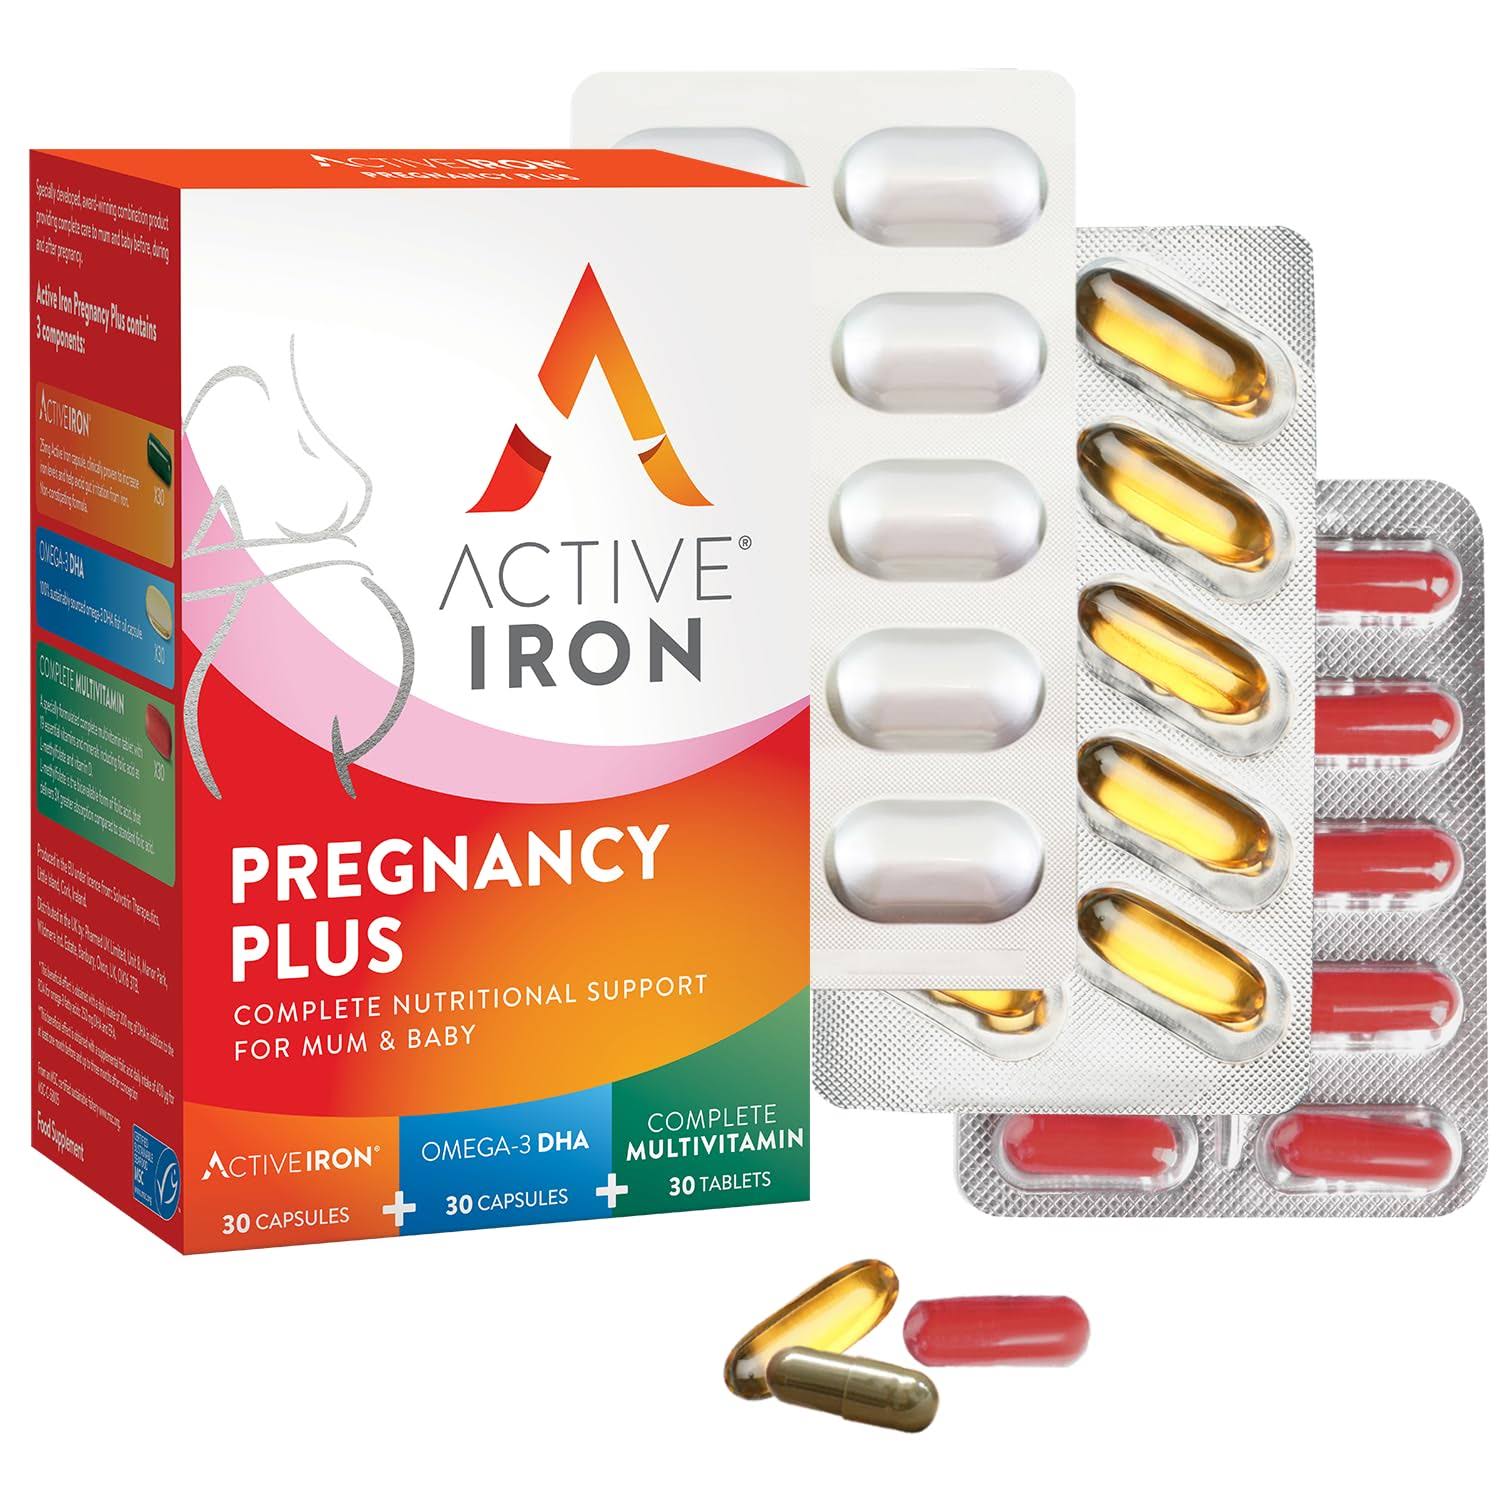 Solvotrin Active Iron Pregnancy Plus | 25mg Iron | Omega-3 | Multivitamin with Active Folic | 30 Day Supply